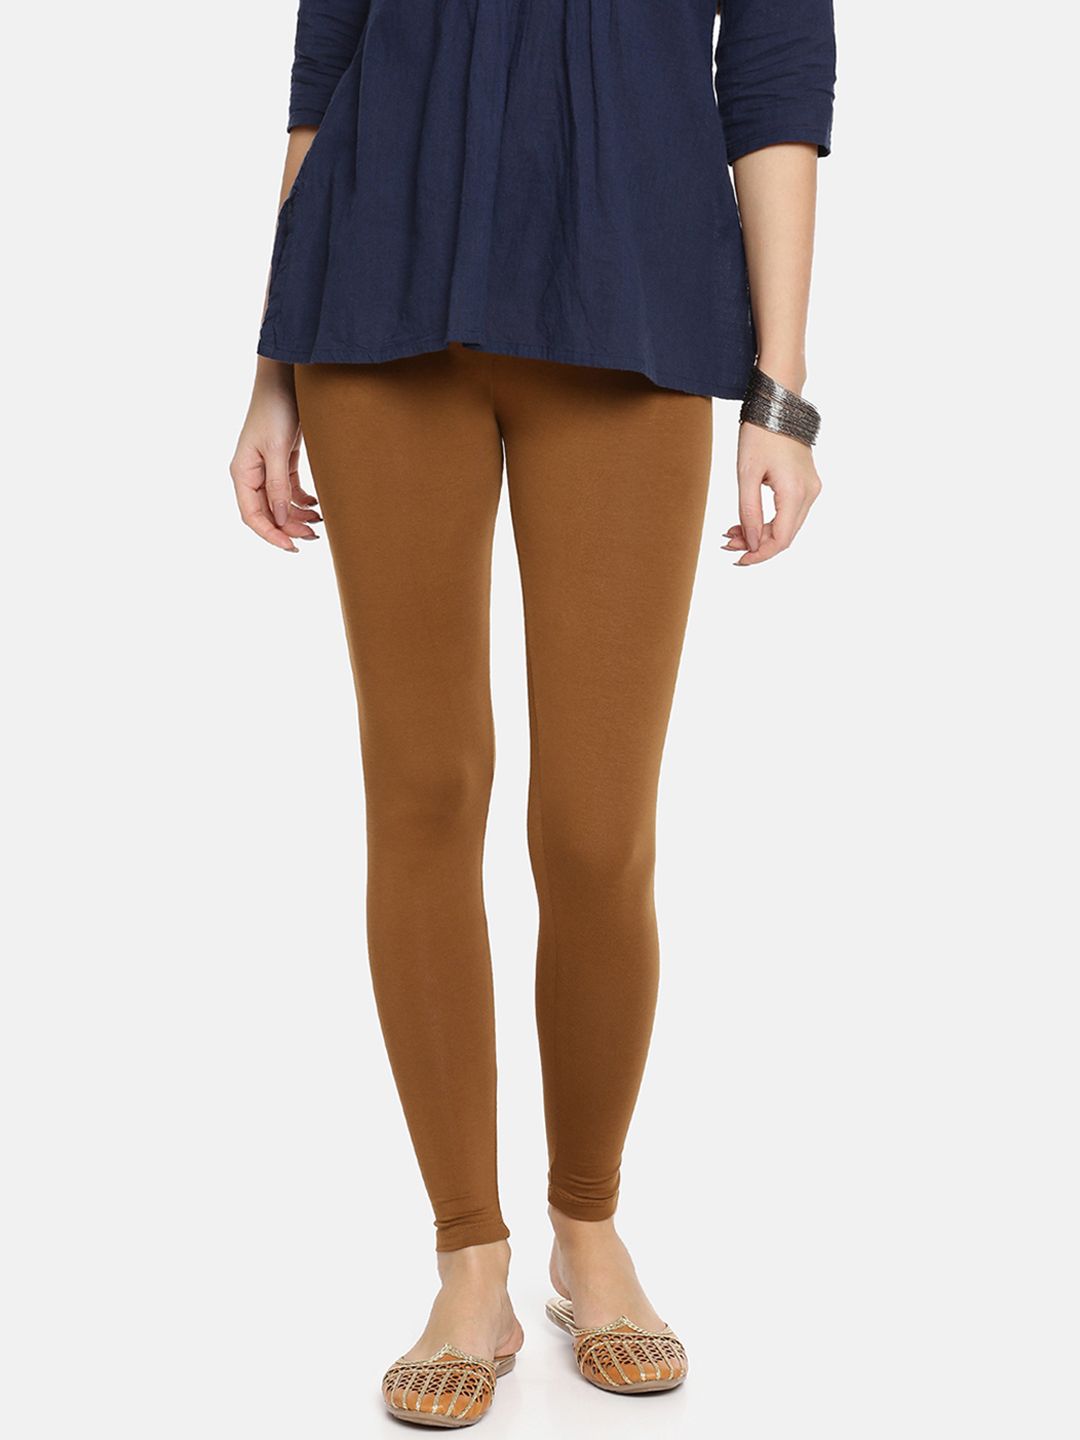 TWIN BIRDS Women Brown Solid Ankle-Length Leggings Price in India